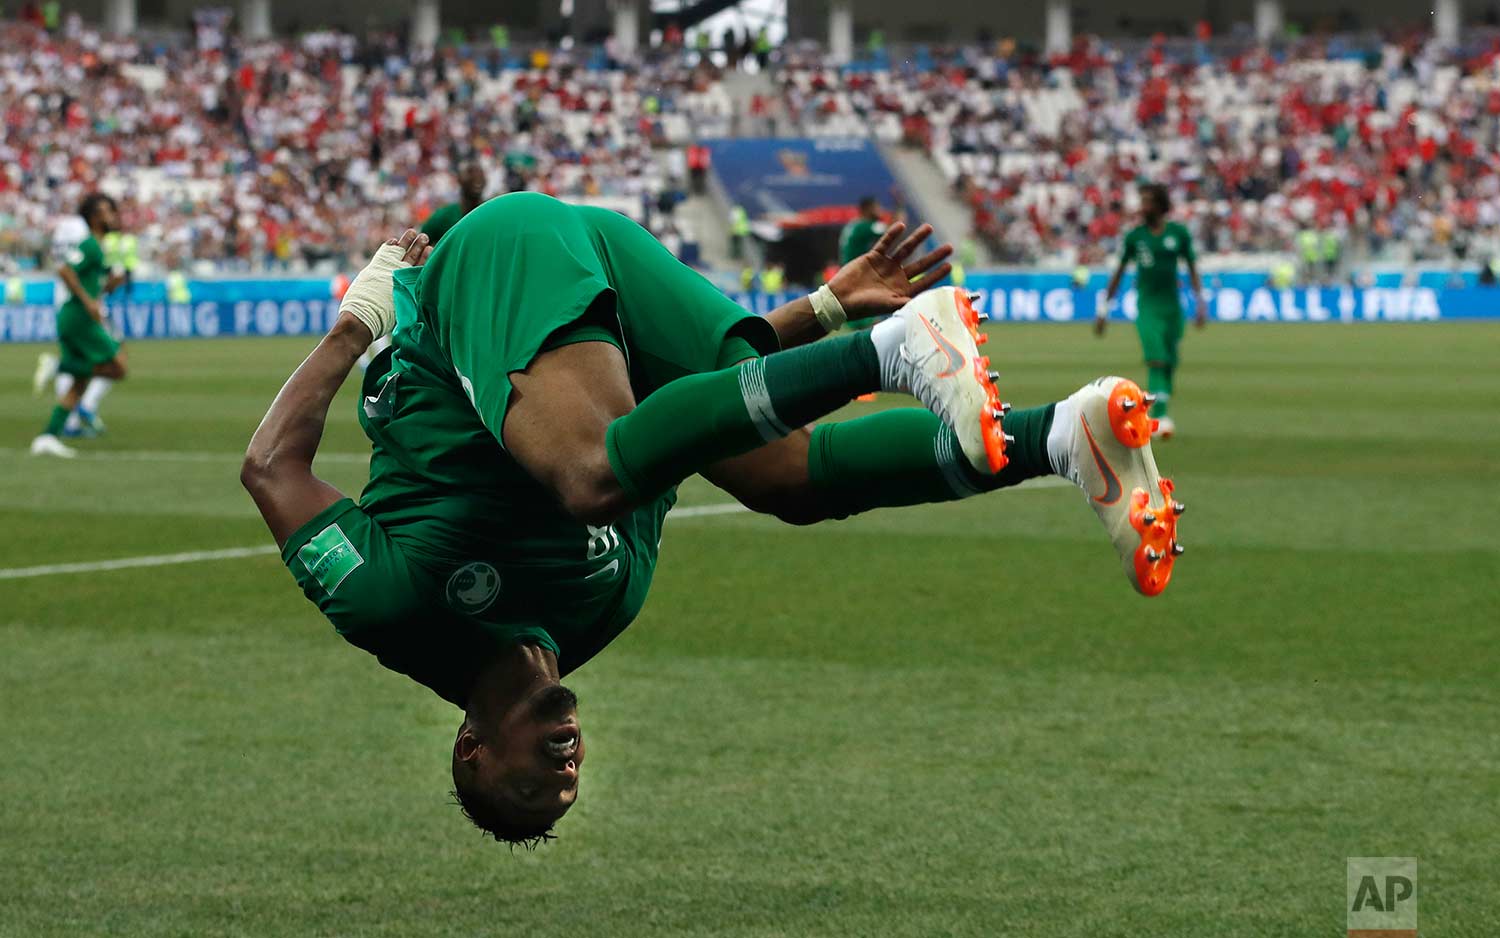  Saudi Arabia's Salem Aldawsari celebrates with a flip after scoring his side's second goal during the group A match between Saudi Arabia and Egypt at the 2018 soccer World Cup at the Volgograd Arena in Volgograd, Russia, Monday, June 25, 2018. (AP P